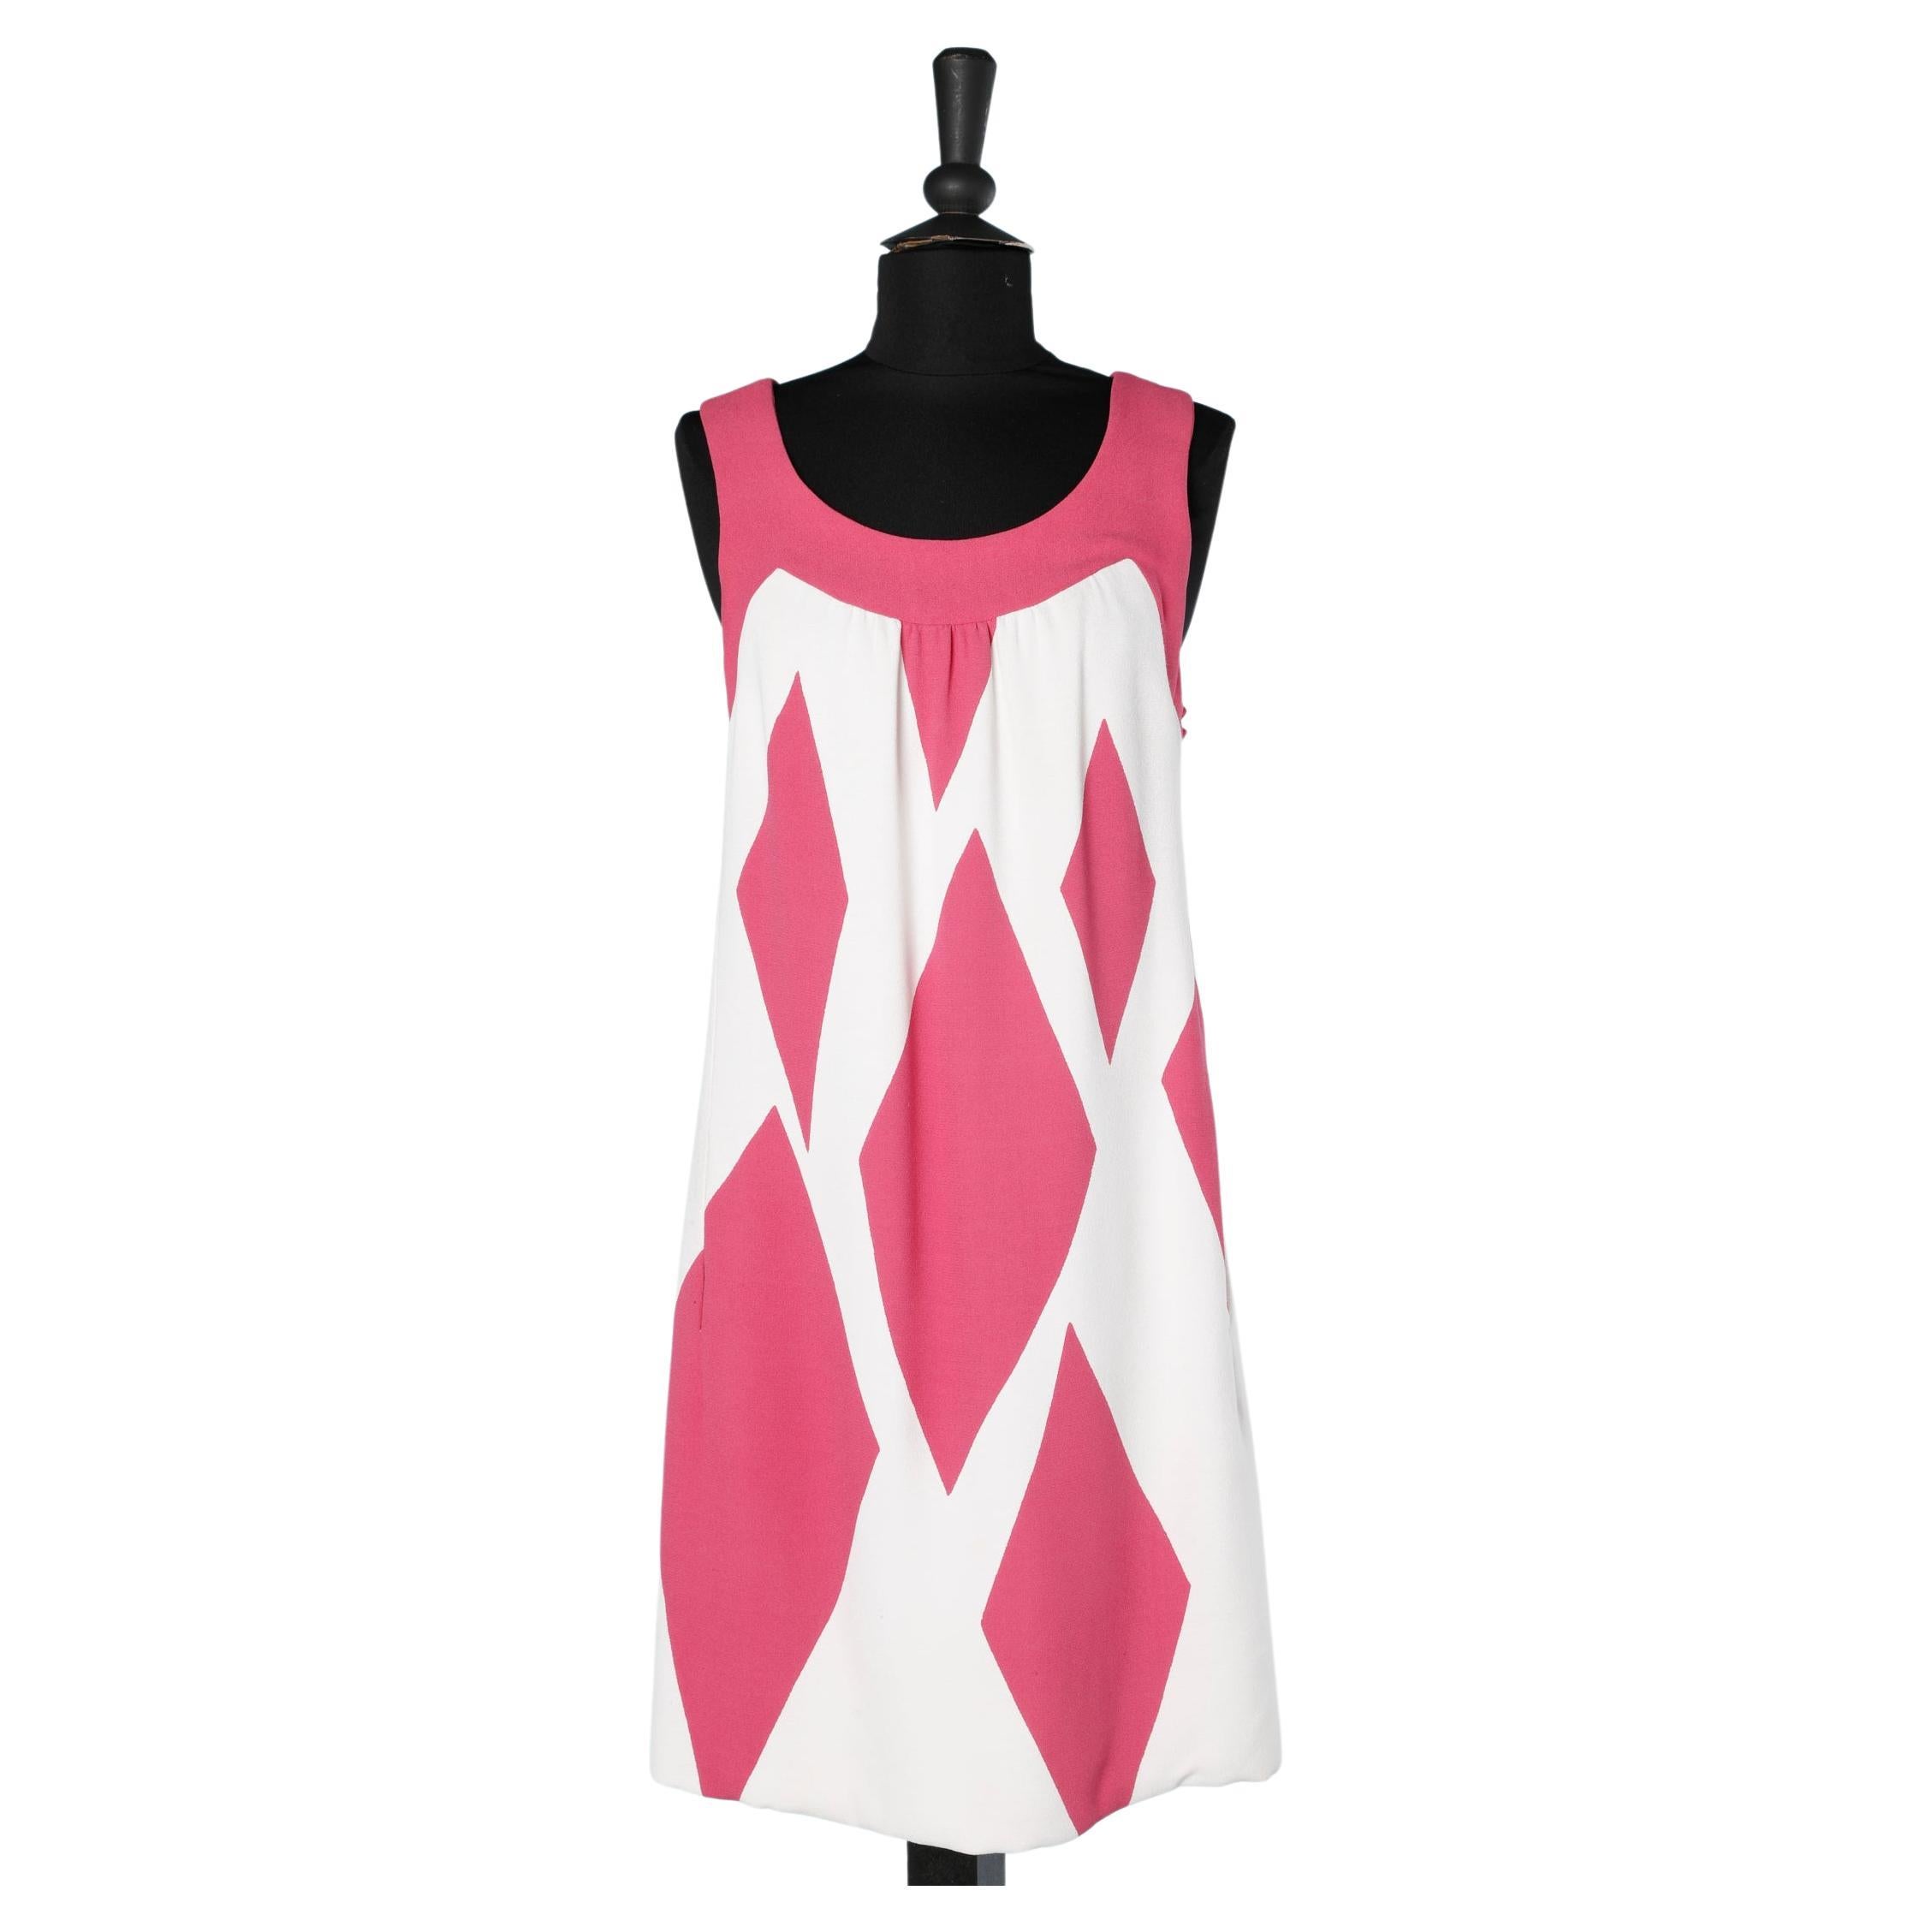 White and pink lozenge print cocktail dress Jean Patou by Michel Goma 